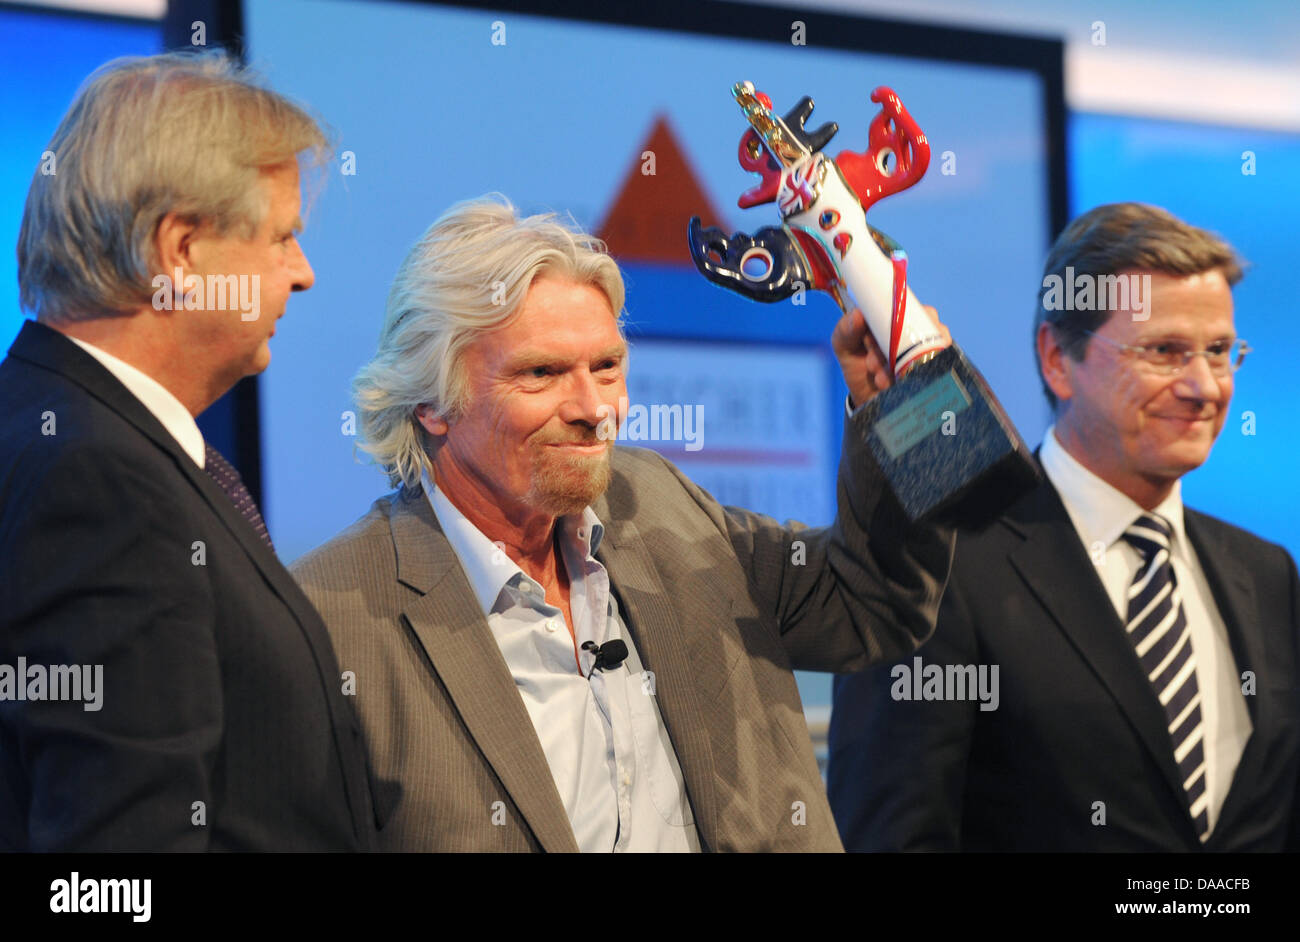 British enterpriser and billionaire Richard Branson is awarded with the German Media Prize 2010 at the Congress Center of Baden Baden, Germany, 24 January 2011. Despite his cruciate ligament rupture, he showed up on crutches to receive his prize. To his left stands media entrepreneur Karlheinz Koegel who founded the prize, to his right German Foreign Minister Guido Westerwelle, who Stock Photo